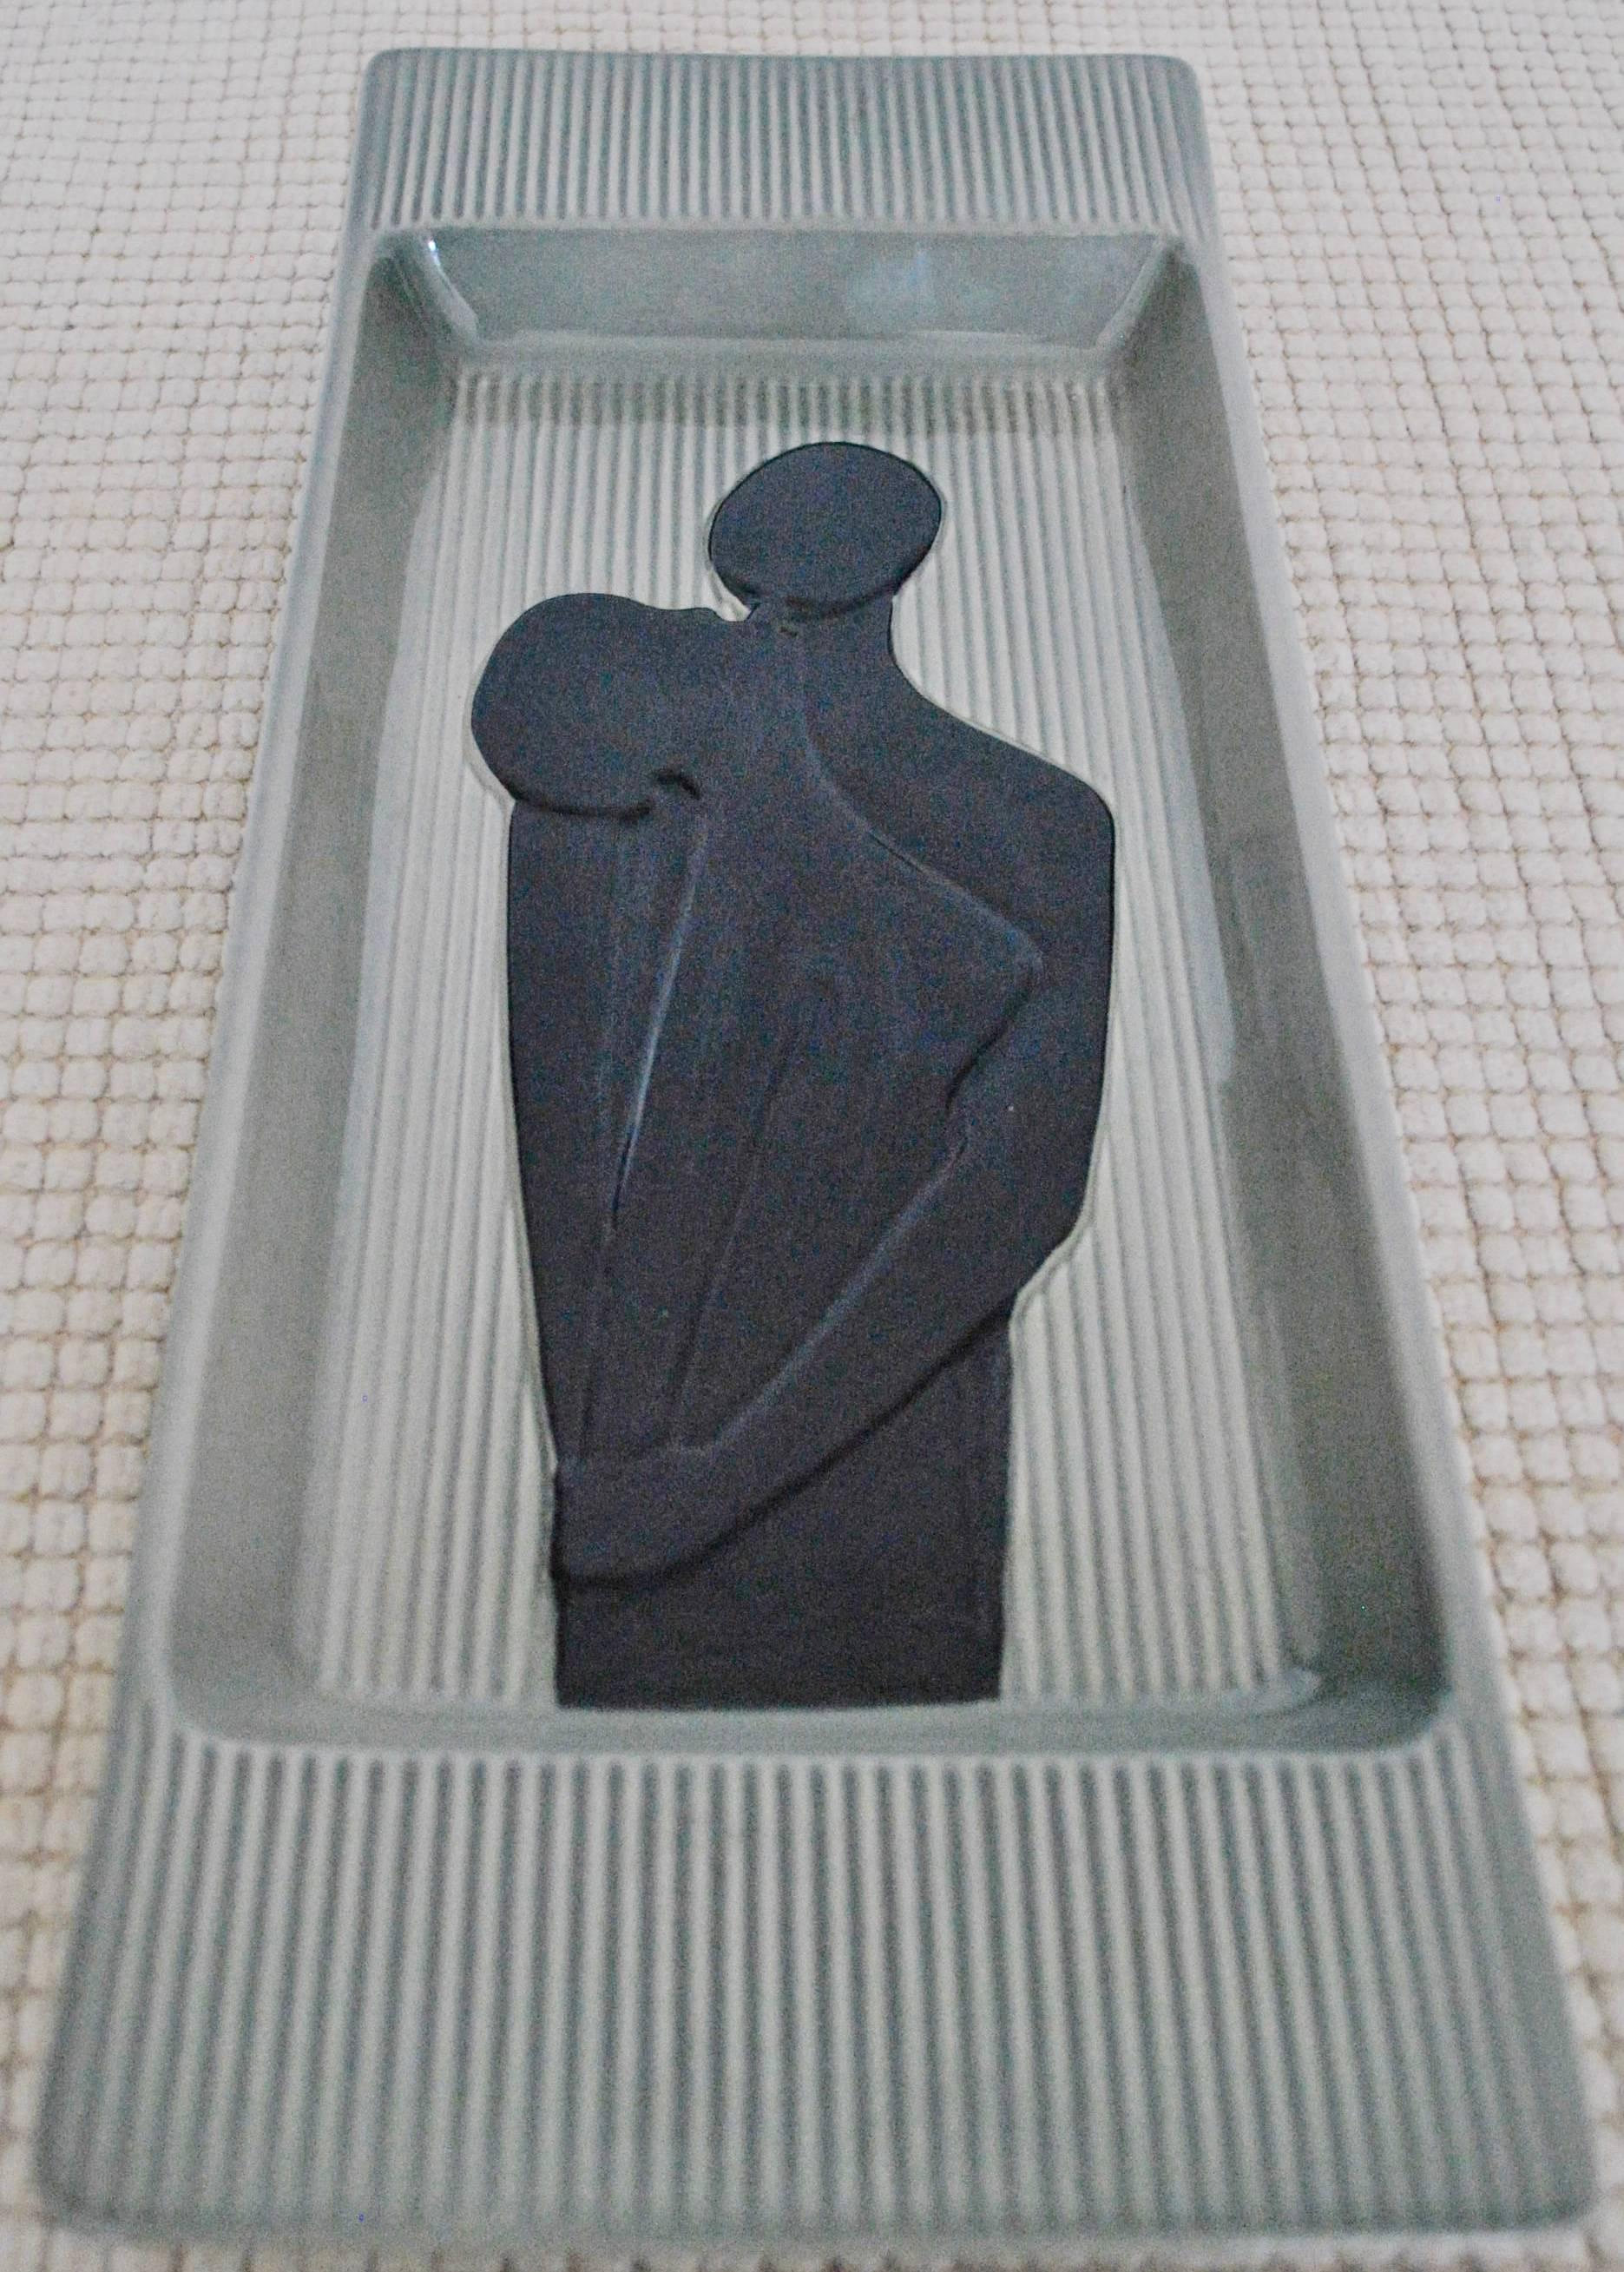 Beautiful relief/bowl in ceramic by Holm Sorensen made at Søholm, Denmark in 1958. Grey with black couple, woman and man. The back the relief has some small holes for entering some hooks/strings.
Stamped with signature and model number 508.